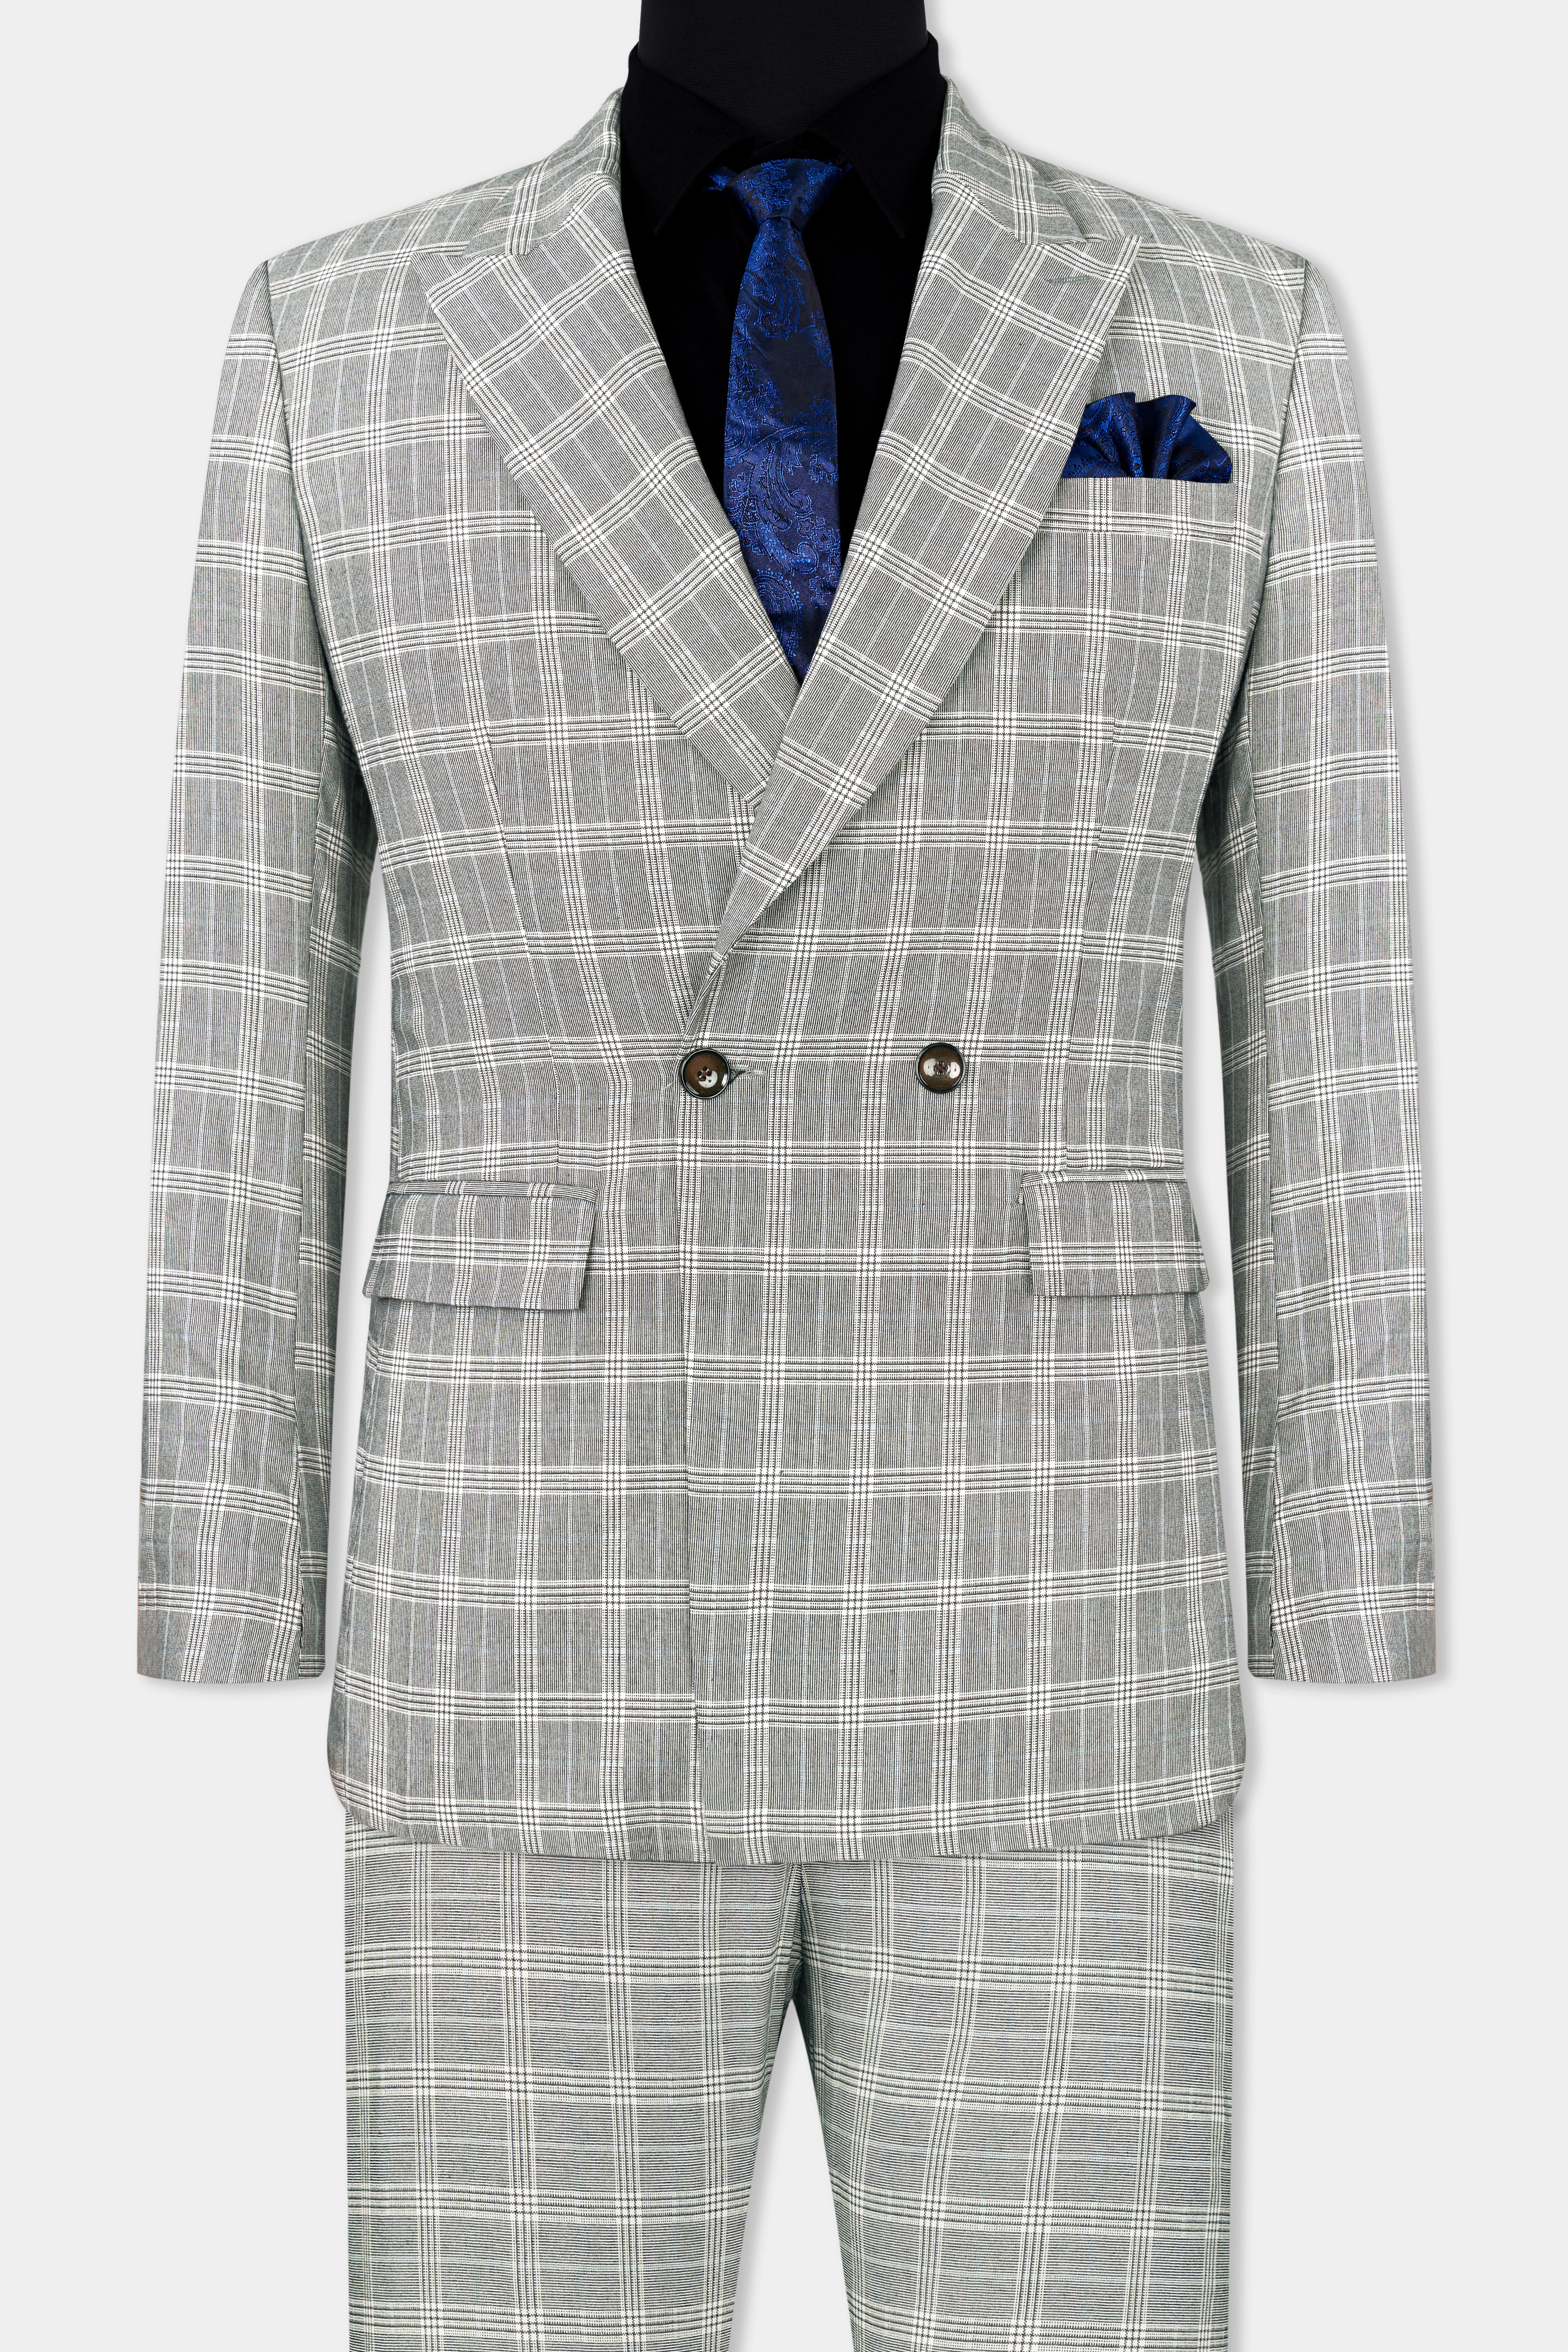 Bronco Gray and White Plaid Double Breasted Suit